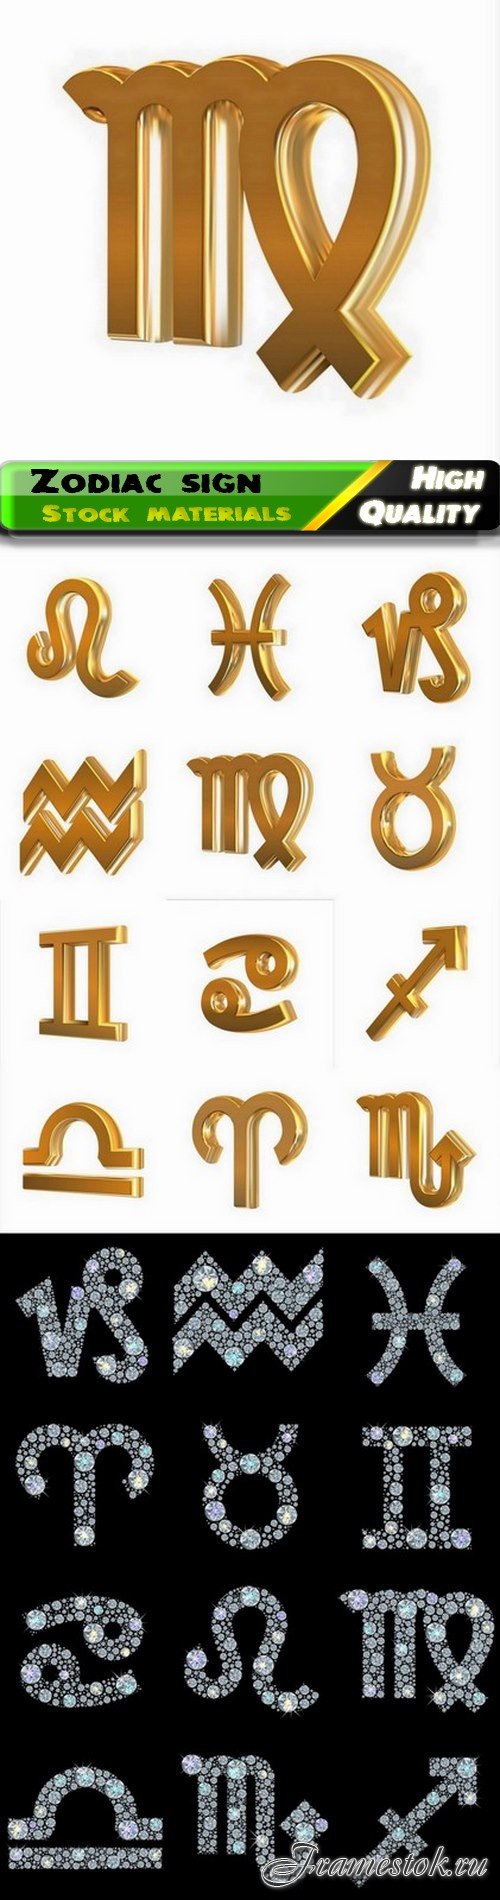 Gold and diamond zodiac sign and symbol 25 Eps